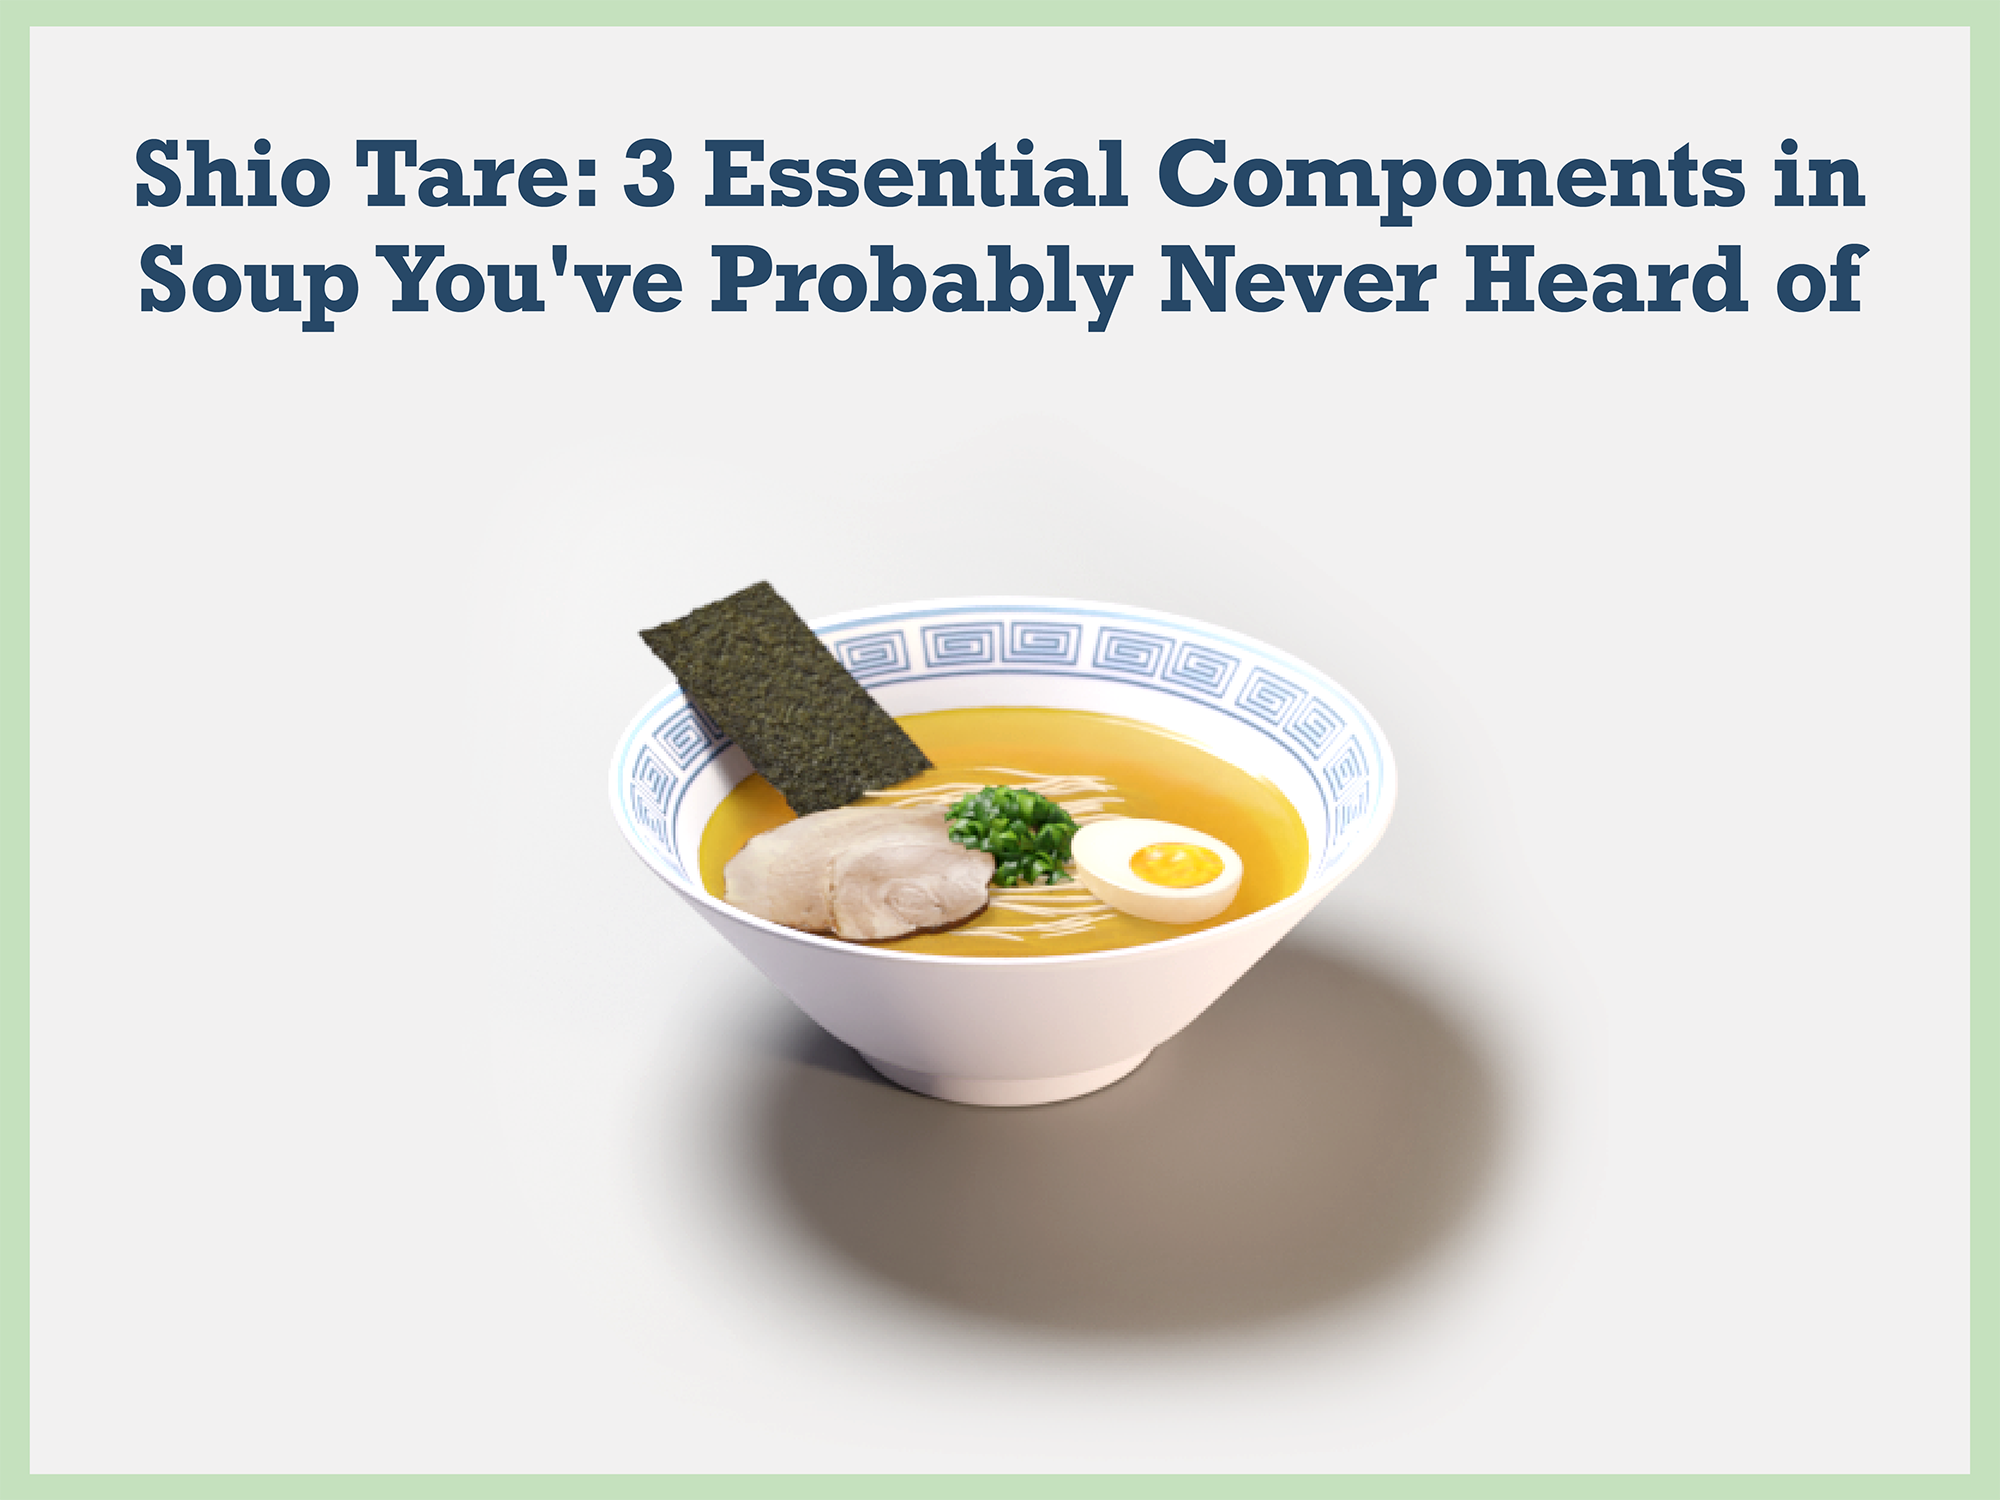 Shio Tare: 3 Essential Components in Soup You've Probably Never Heard of